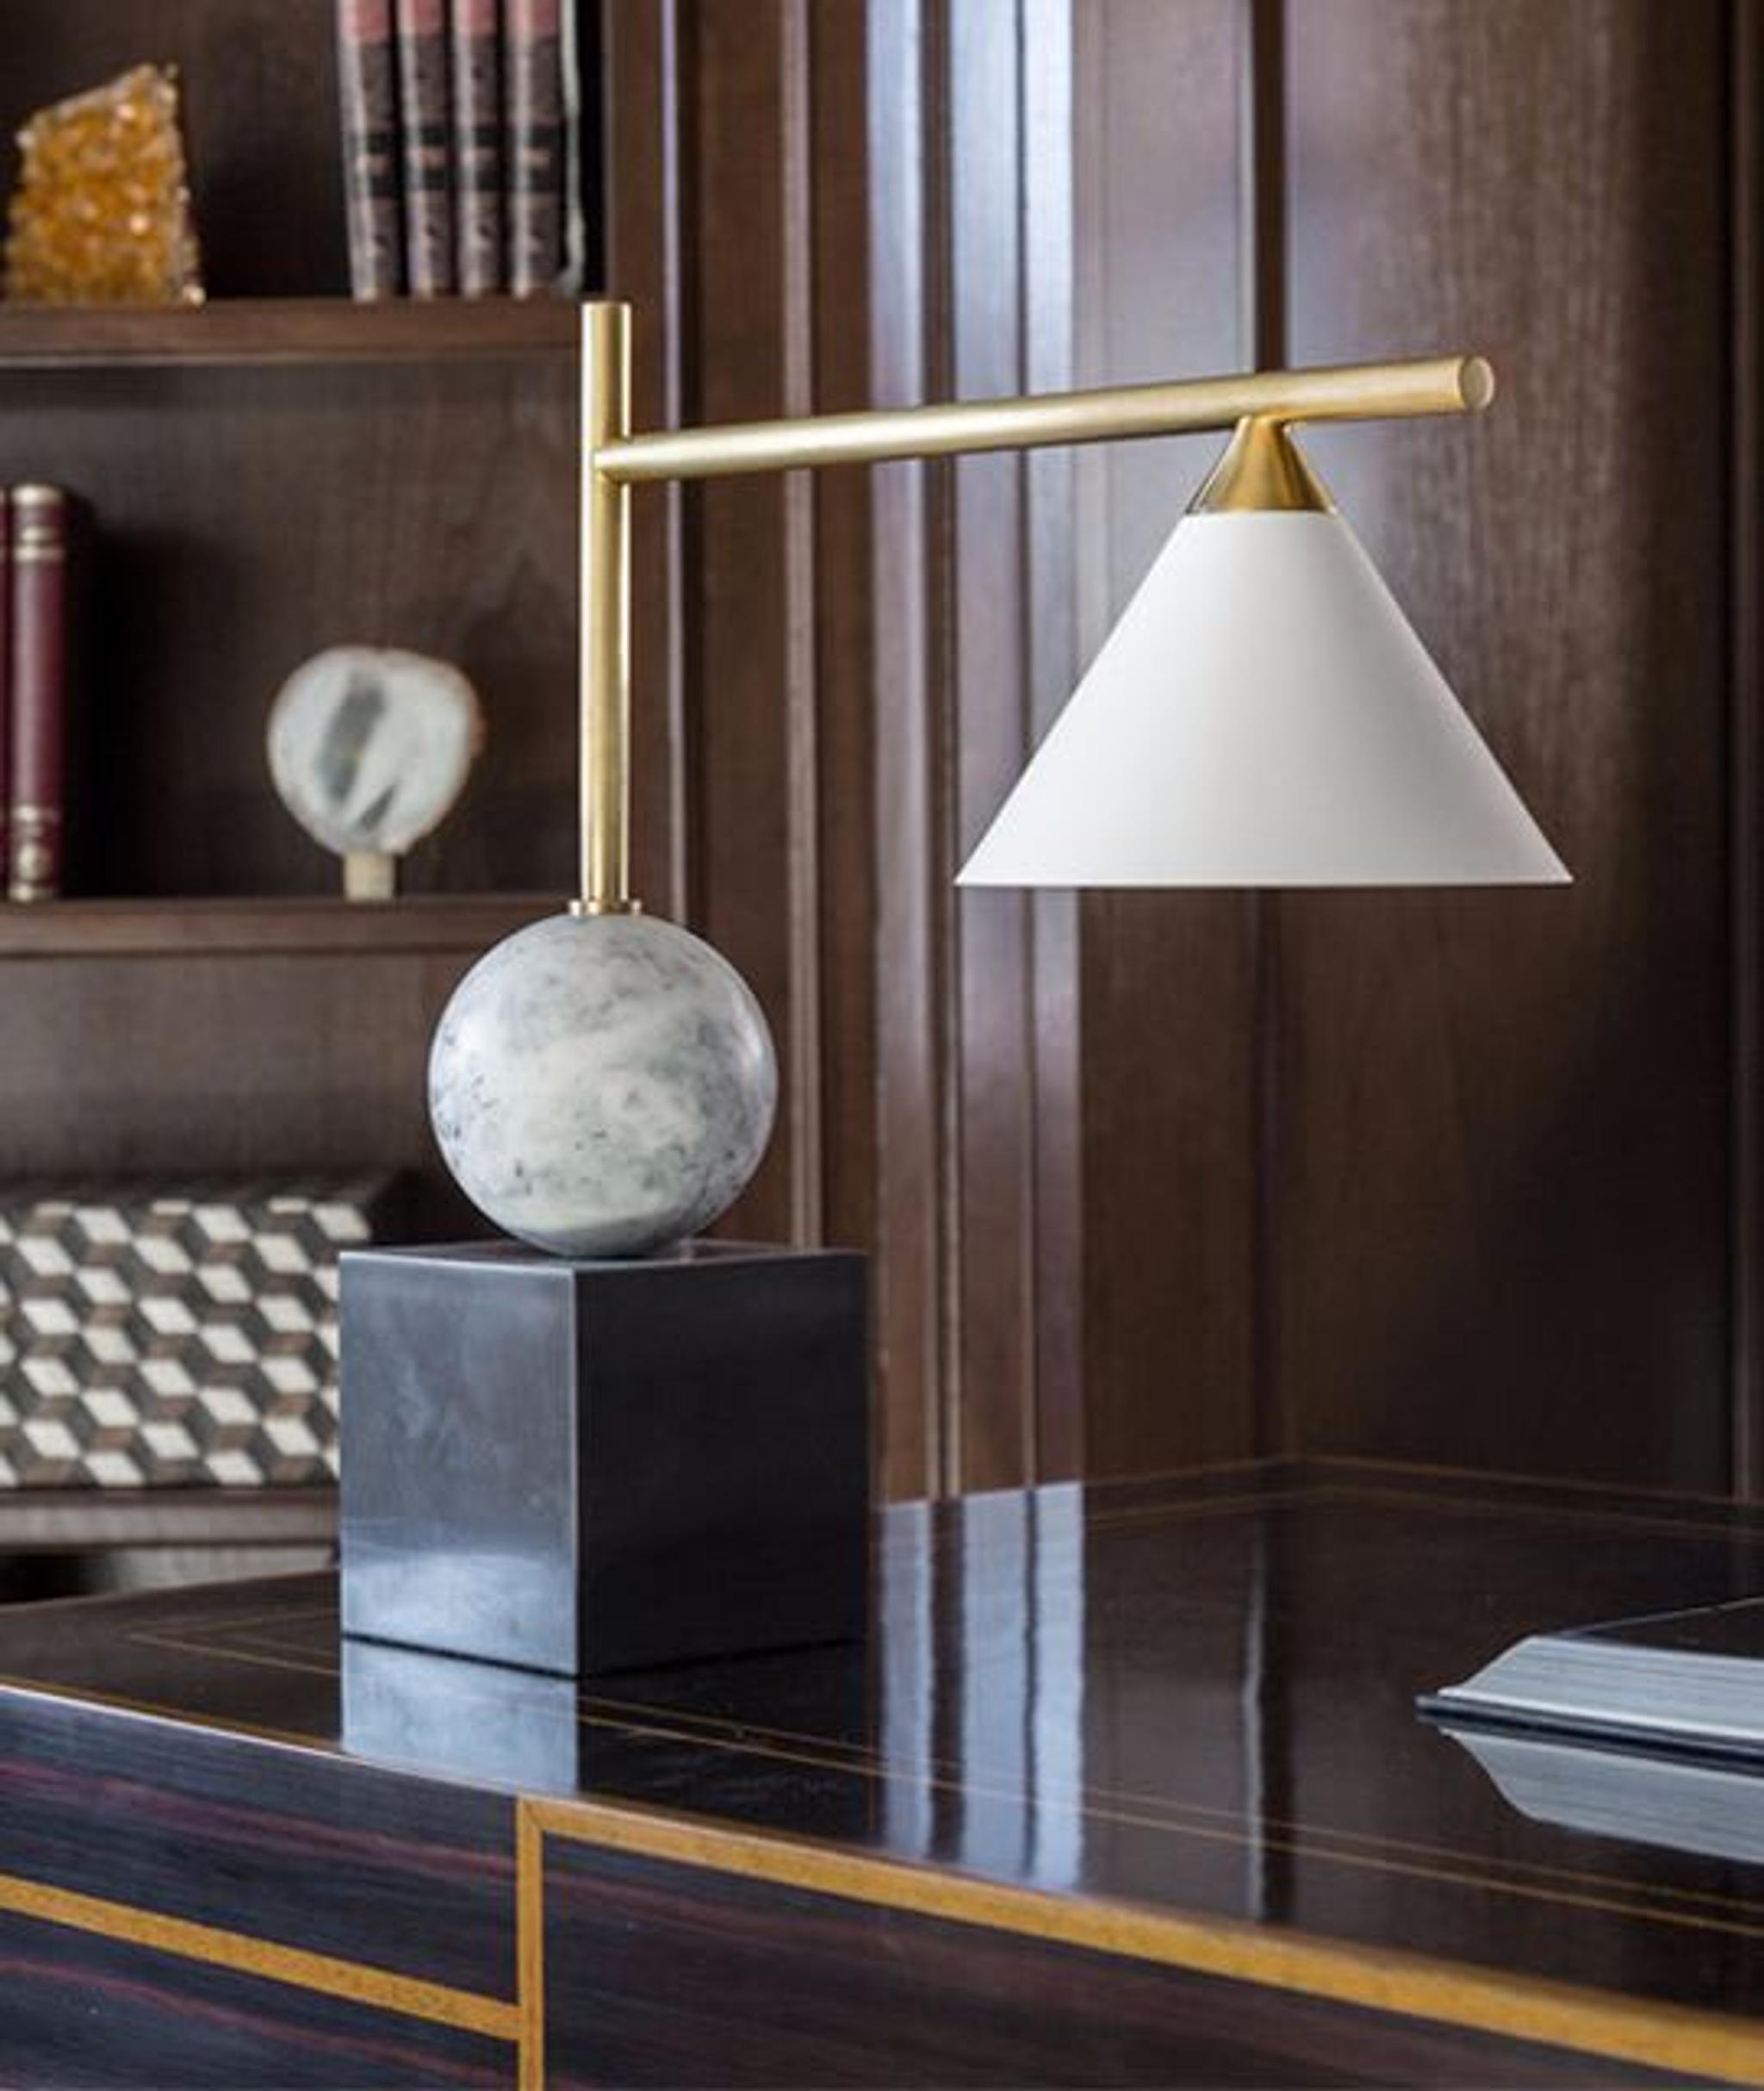 Beautifully designed table lamp placed on the desk of this charming home office by Jordan Carlyle